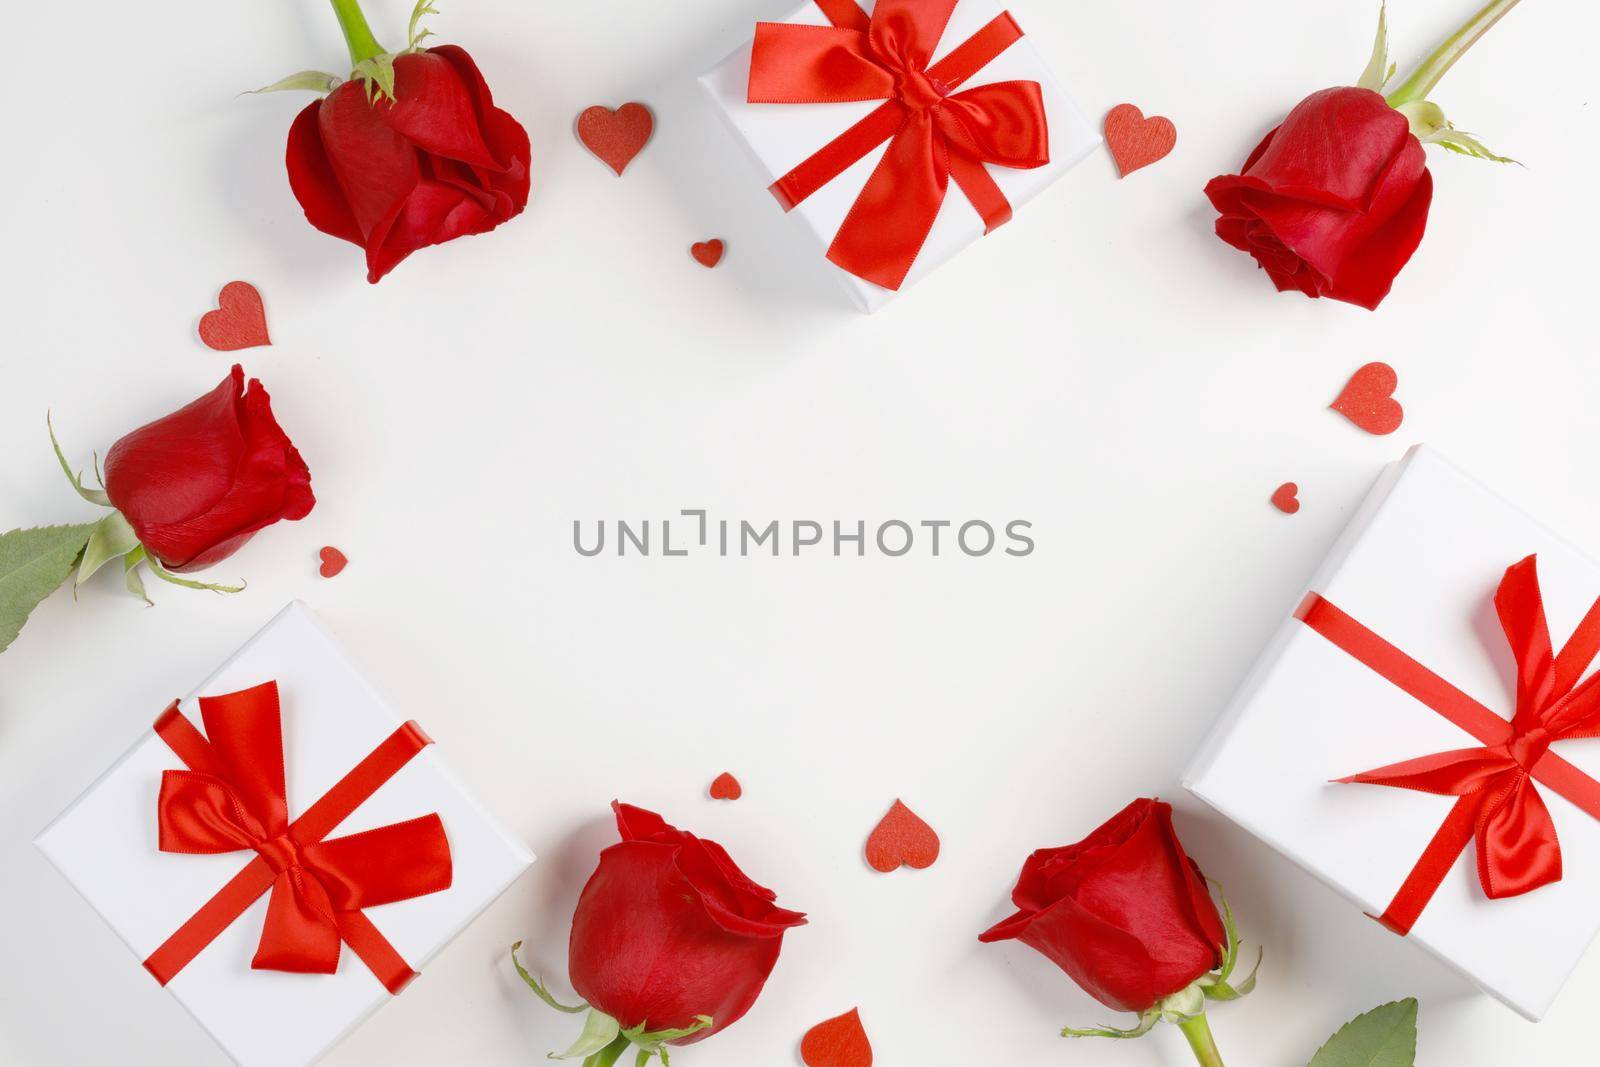 Red rose flowers gifts and red hearts composition on white background top view with copy space. Valentine's day, birthday, wedding, Mother's day concept. Copy space